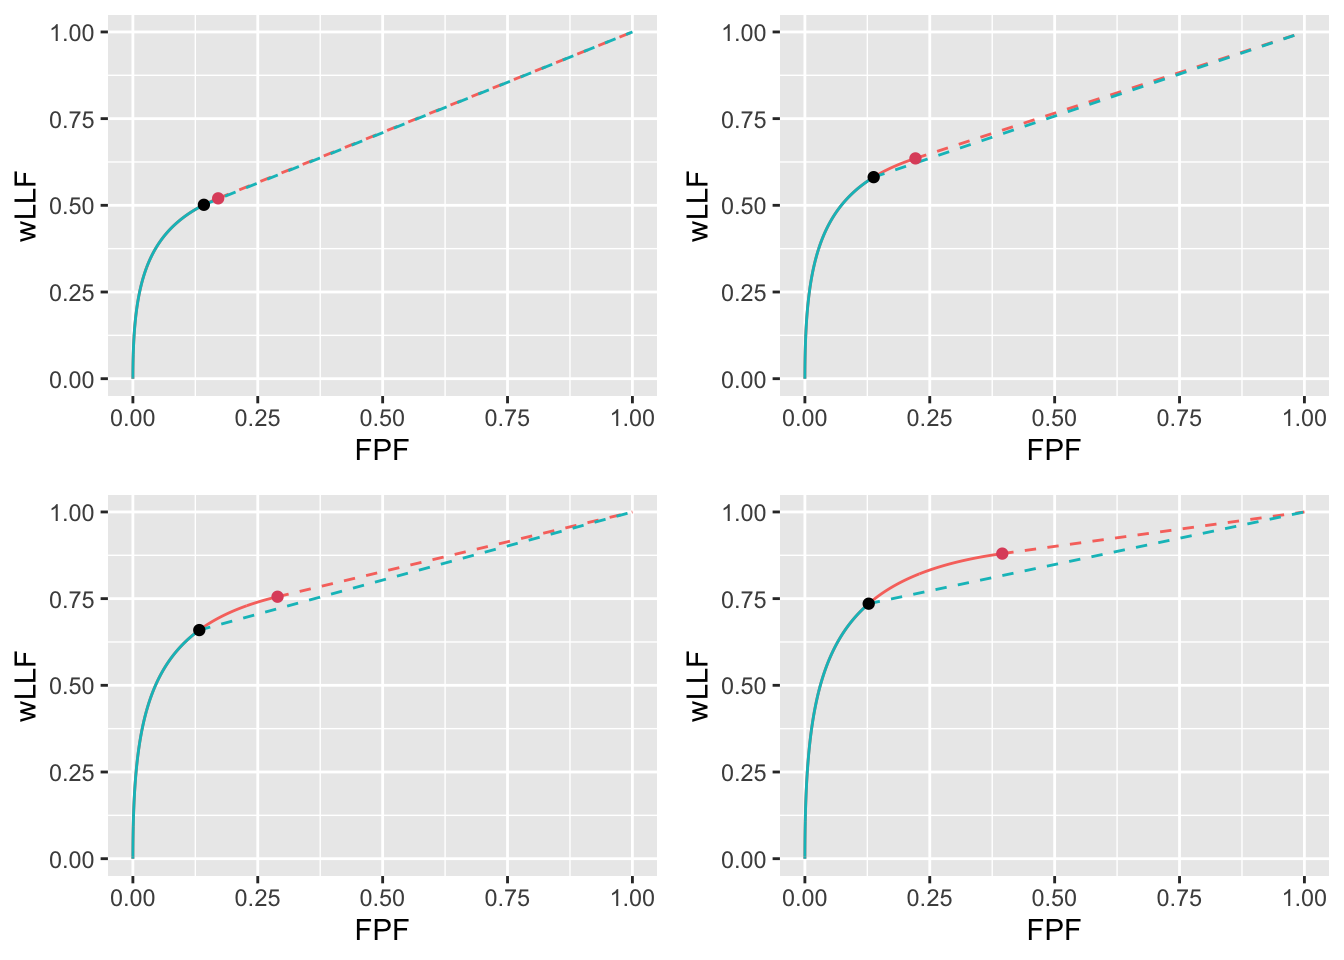 Varying $\nu$ wAFROC plots for the two optimization methods with superimposed operating points with superimposed operating points. The color coding is as in previous figures. The values of $\nu$ are: top-left $\nu = 0.6$, top-right $\nu = 0.7$, bottom-left $\nu = 0.8$ and bottom-right $\nu = 0.9$.